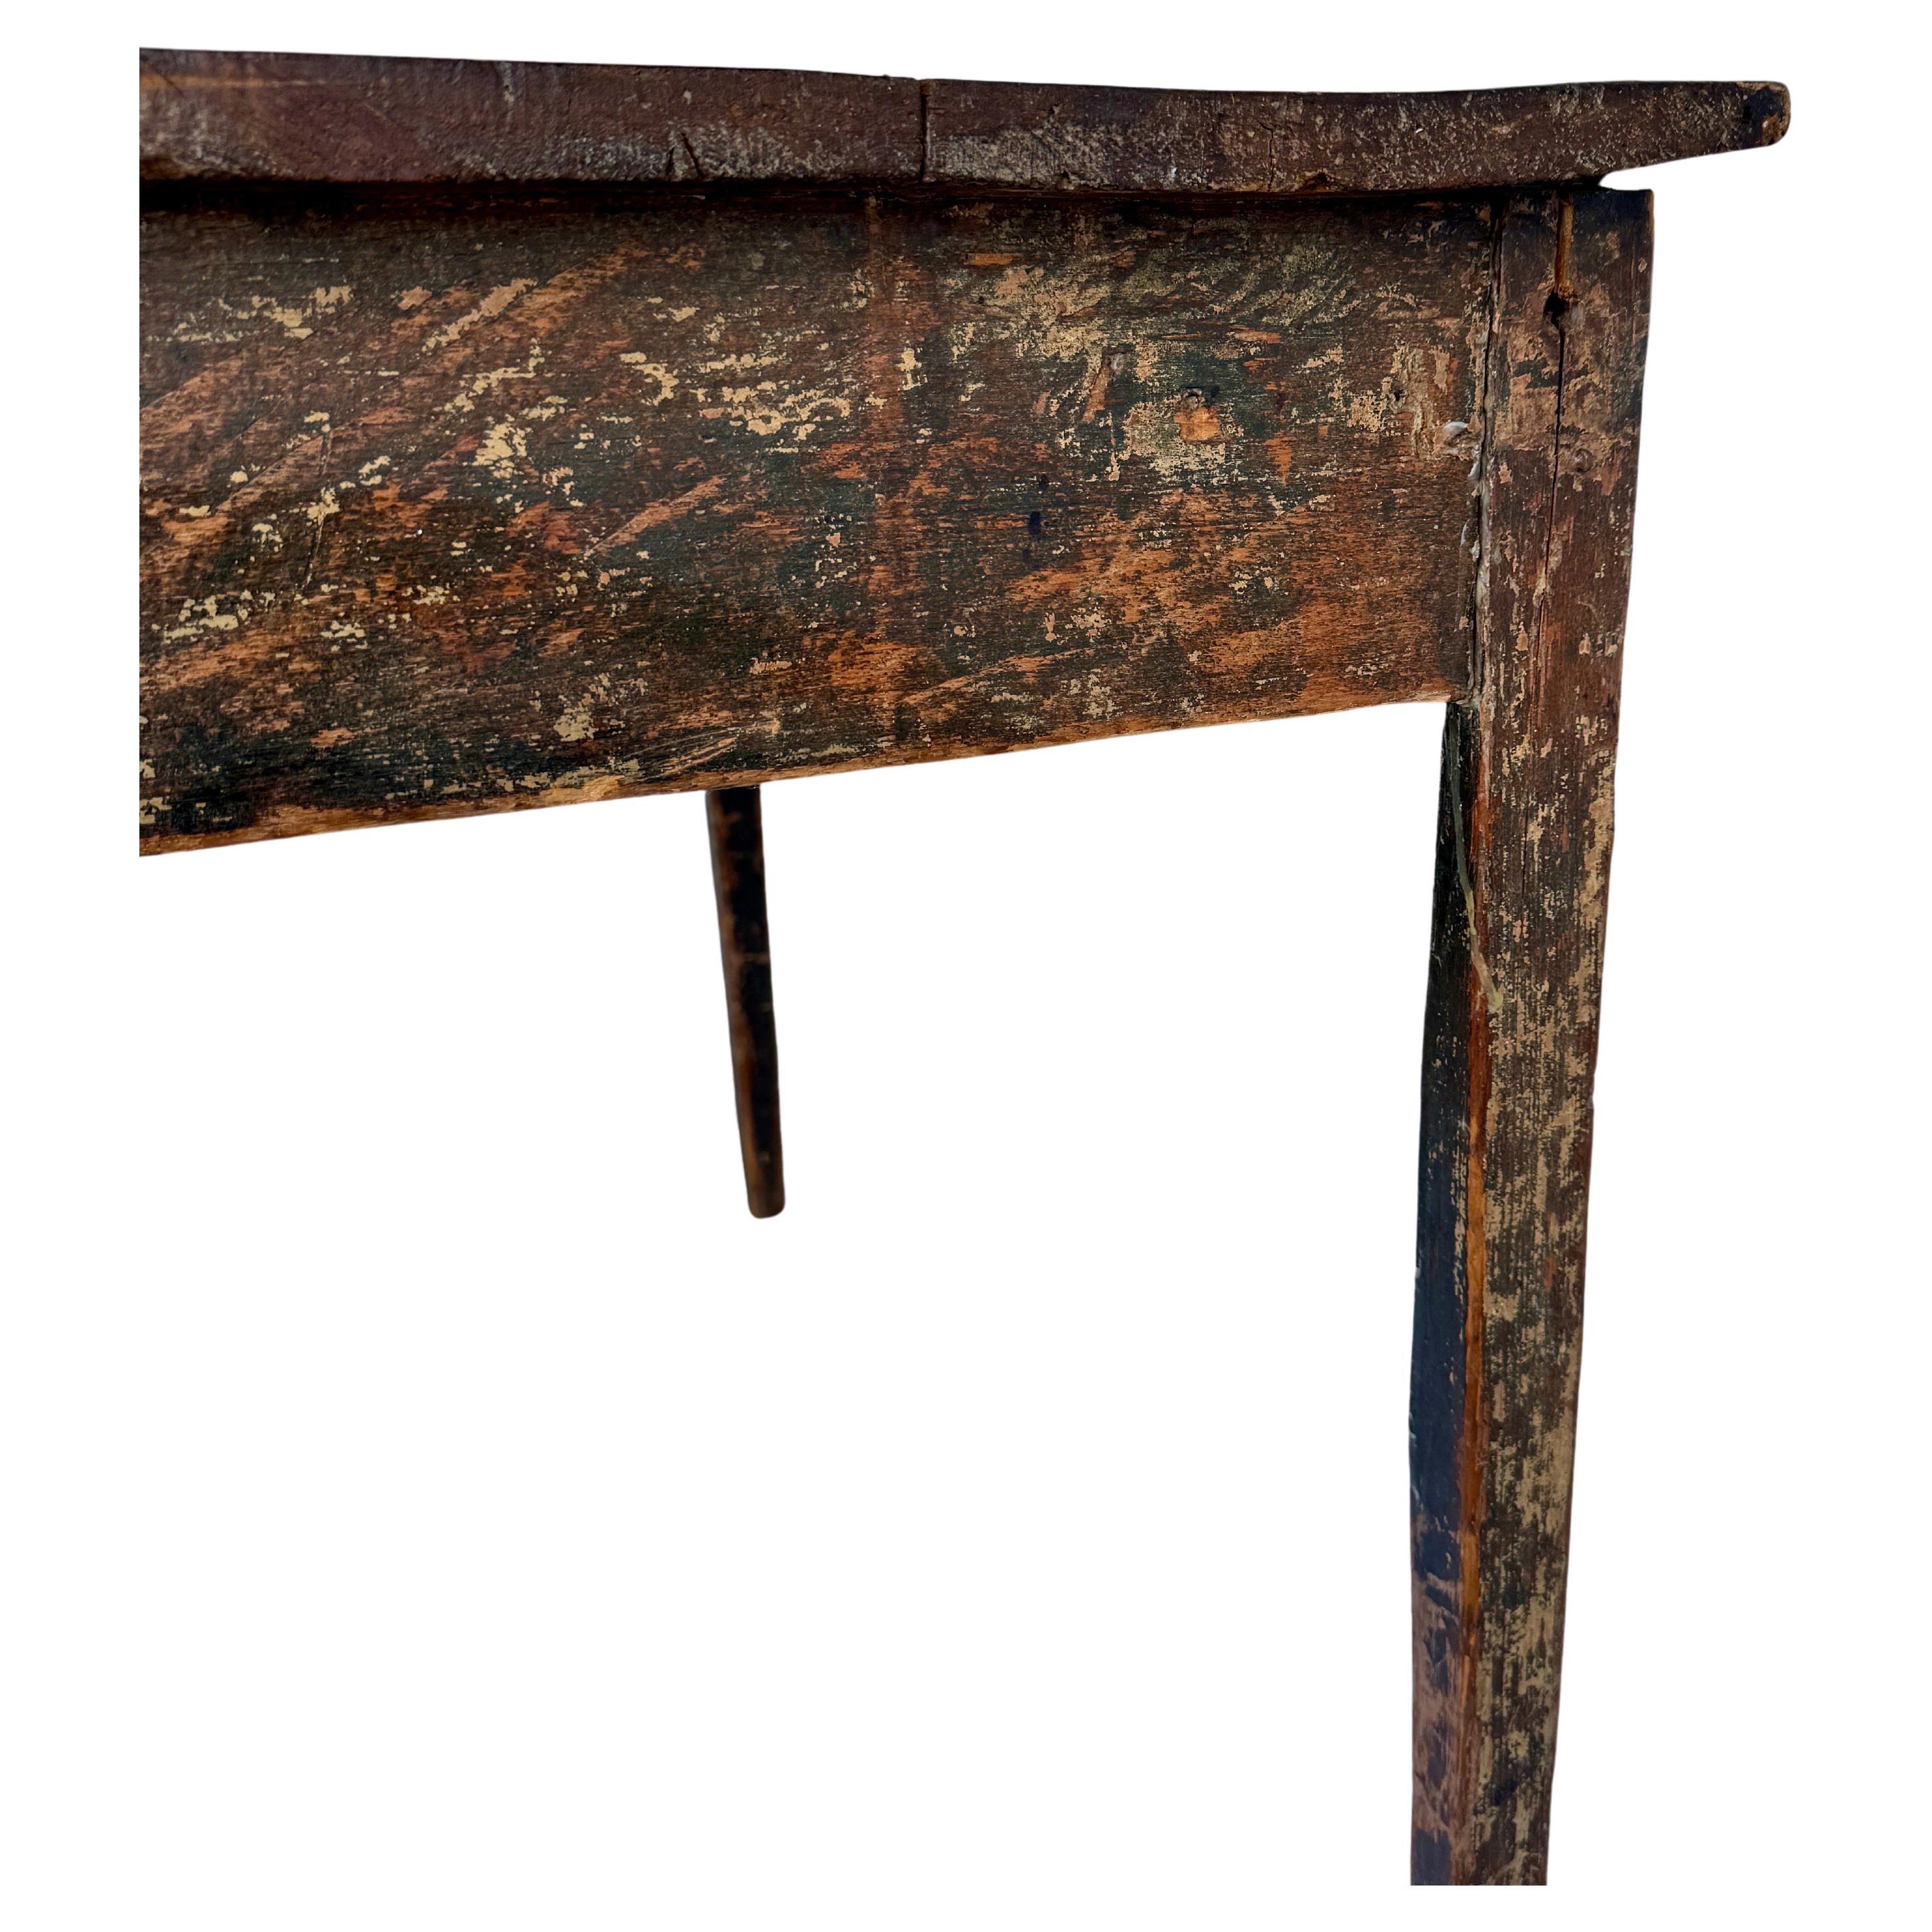 Hand-Crafted Early 19th Century Folk Art Side Table or Desk, Scandinavia For Sale